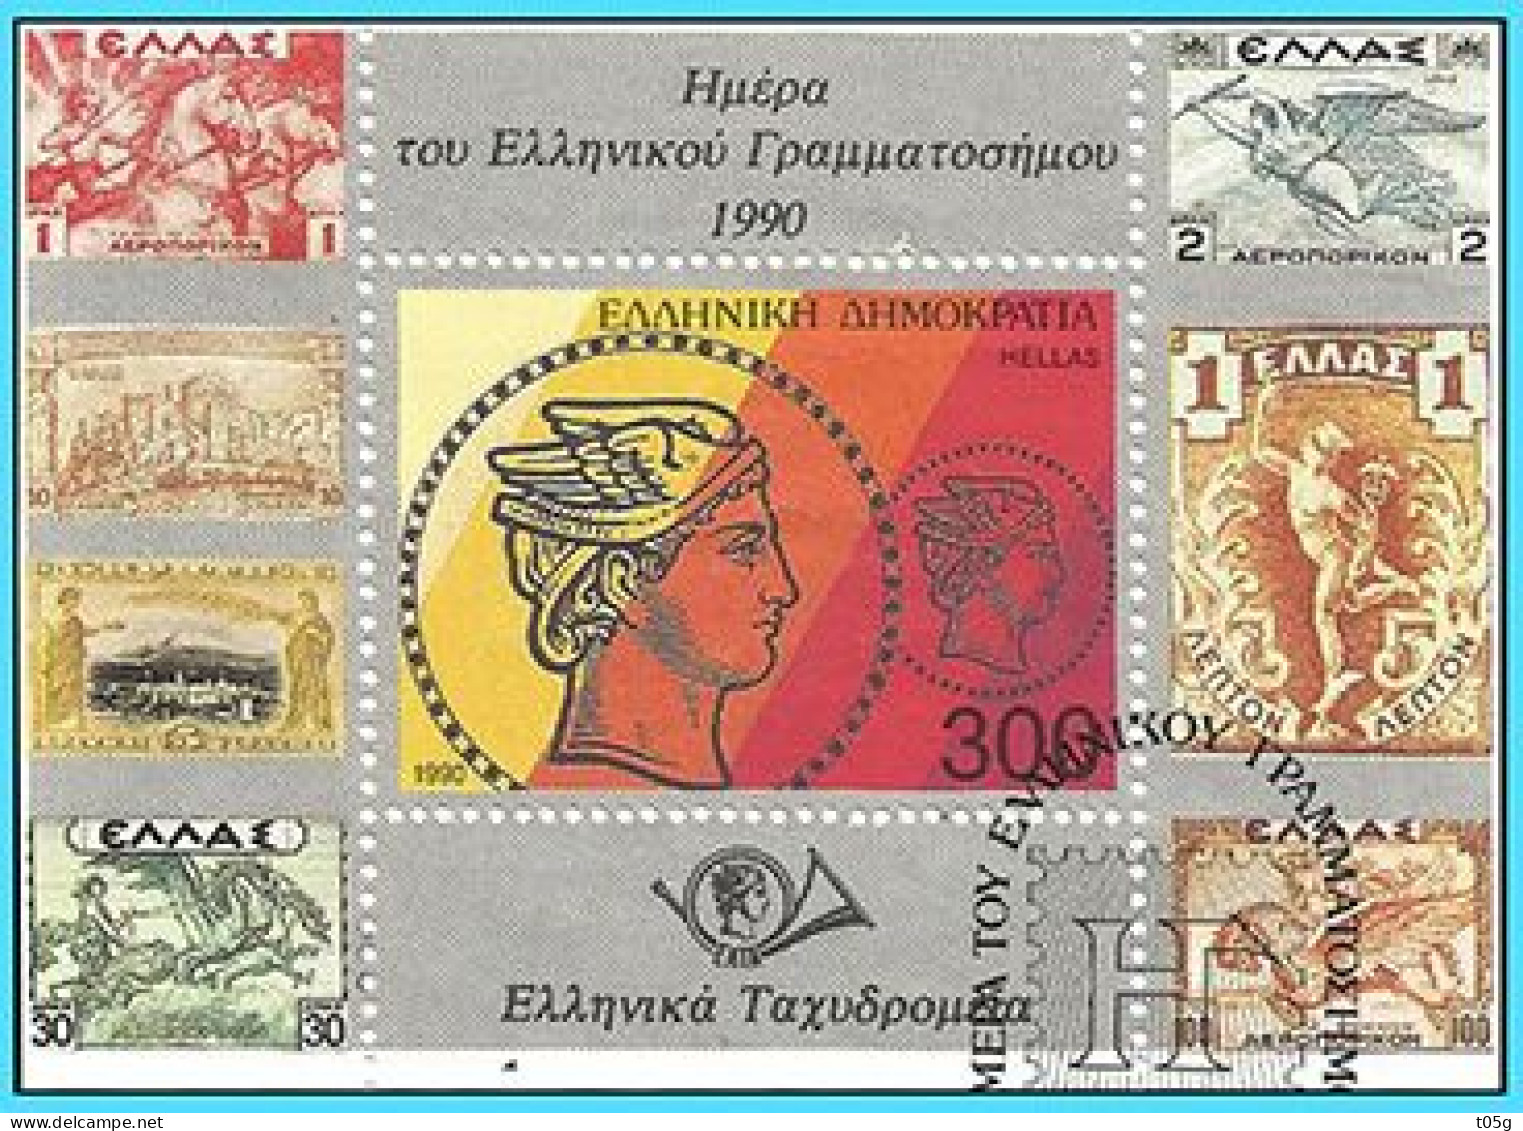 Greece- Grece -Hellas 1990: Greek Stamp Day  Miniature Sheet- Used - Used Stamps